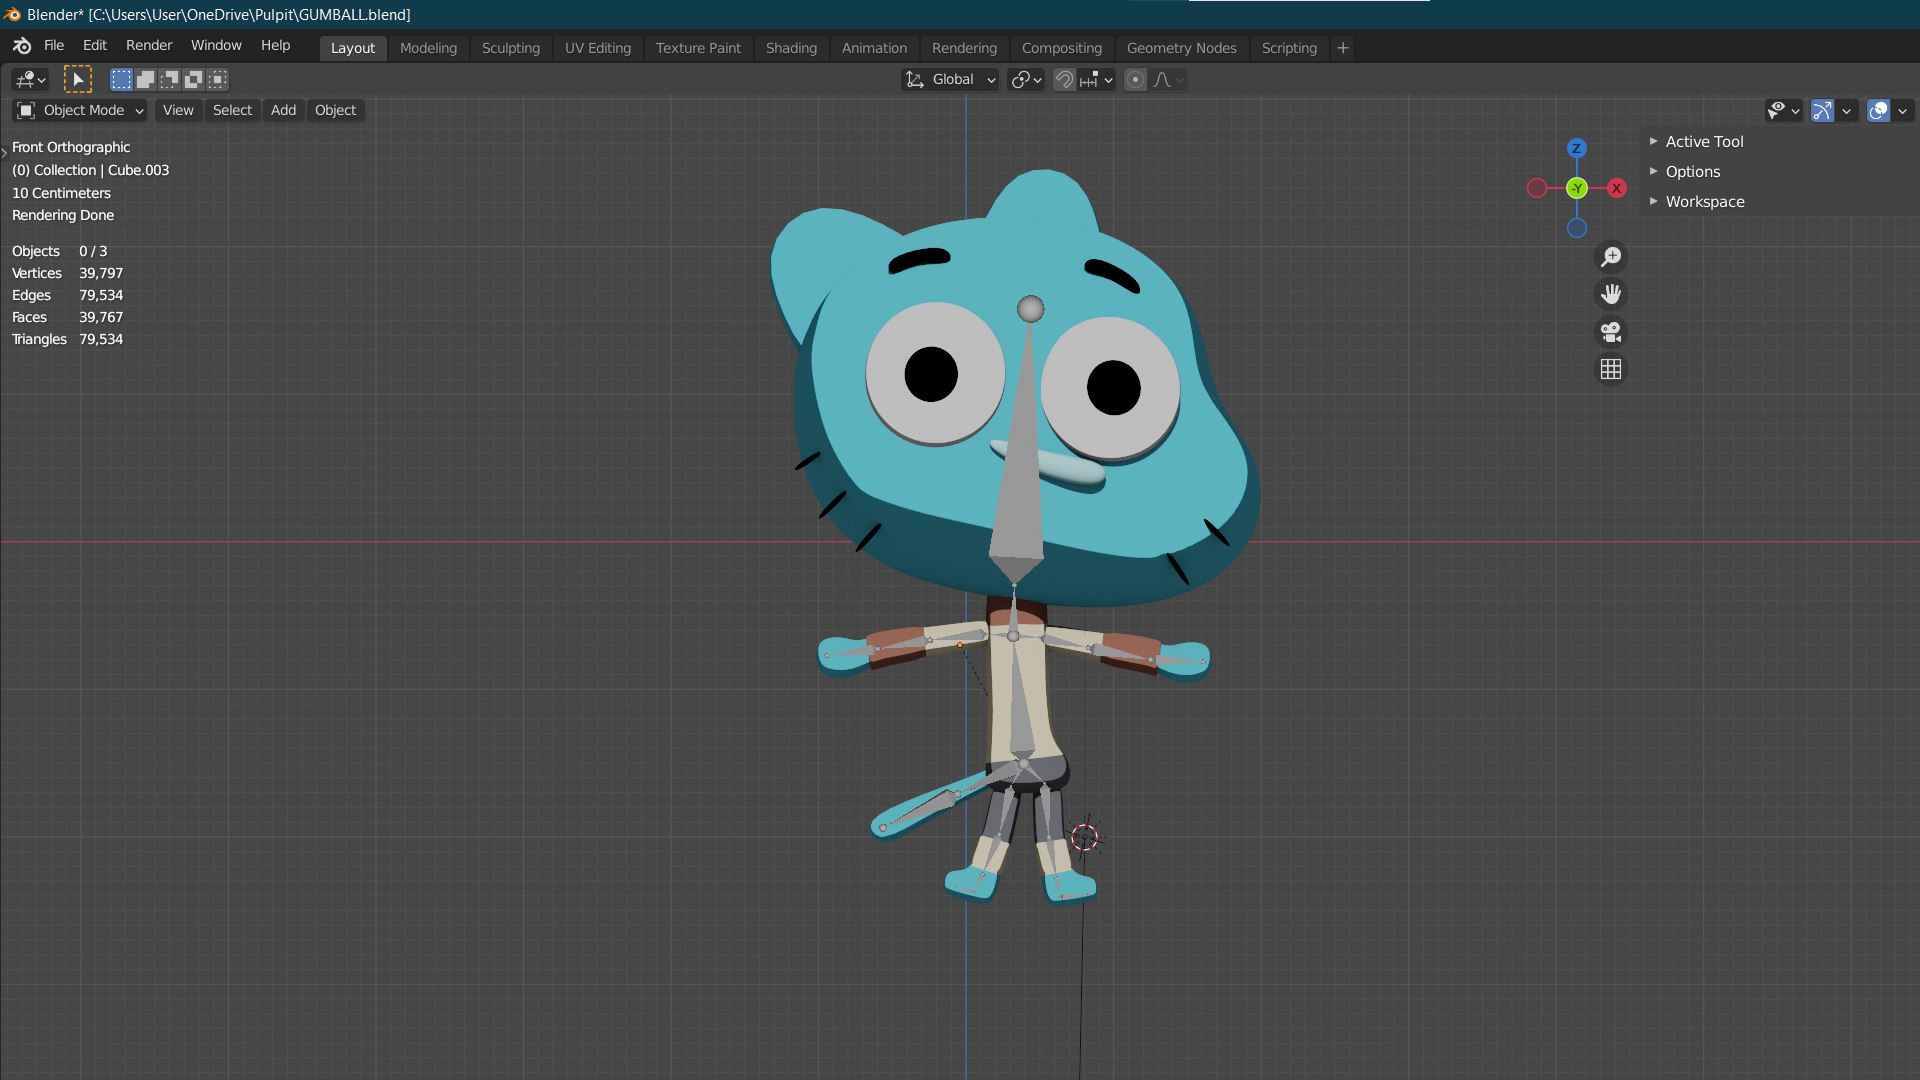 The Amazing World of Gumball Van - 3D model by RedC130 (@RedC130) [7dd9a27]